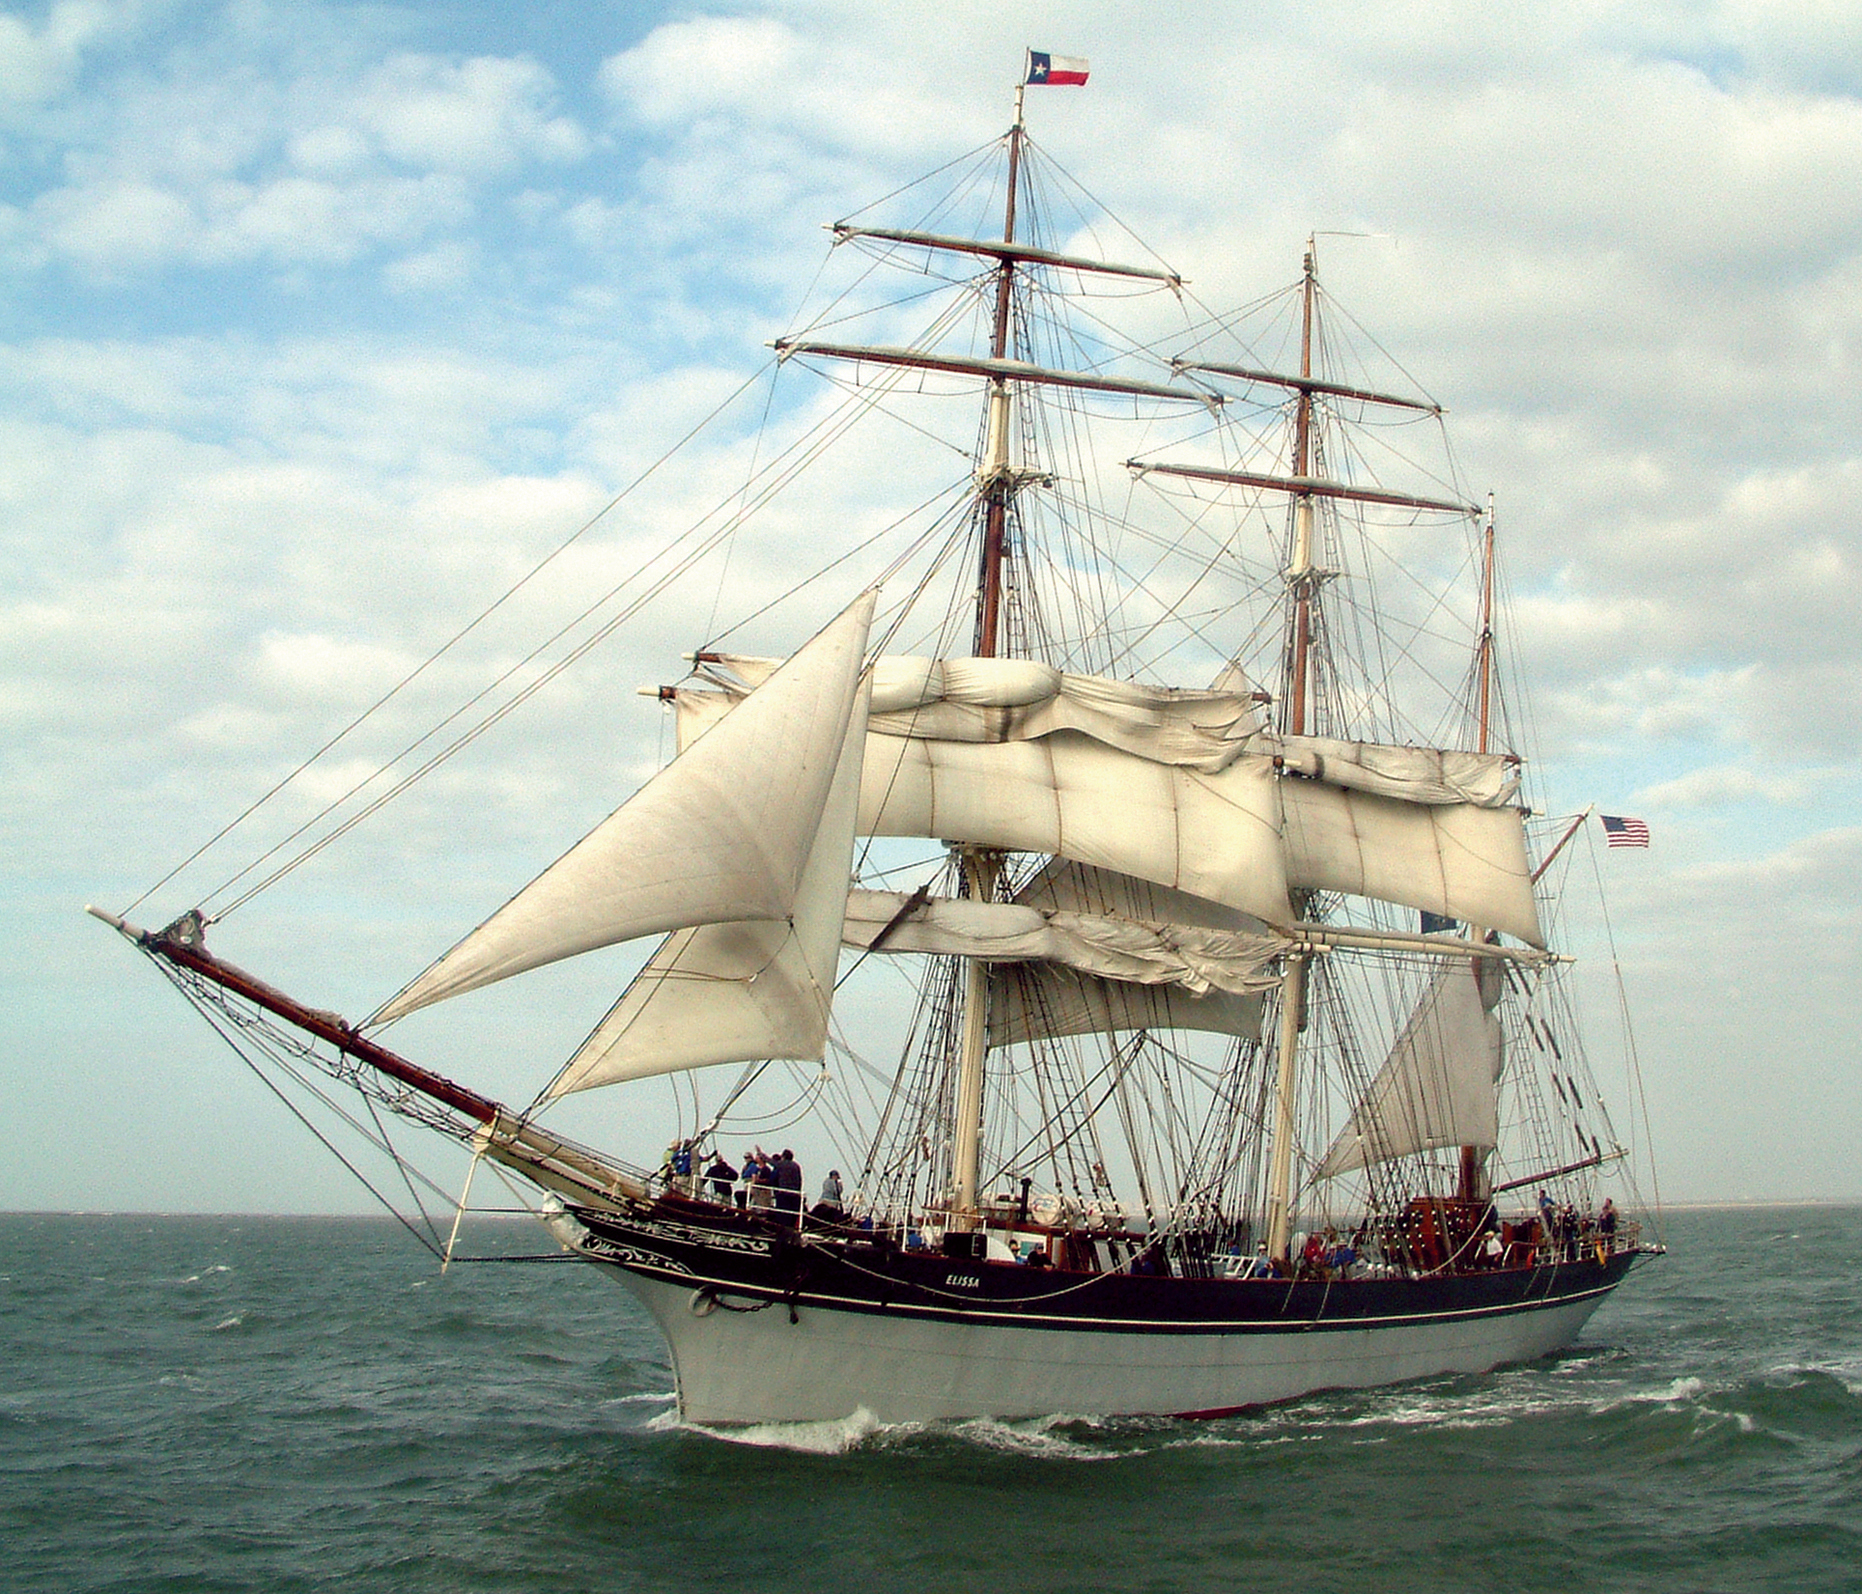 Tall ships: Float your boat and blow your hair back | CNN Travel